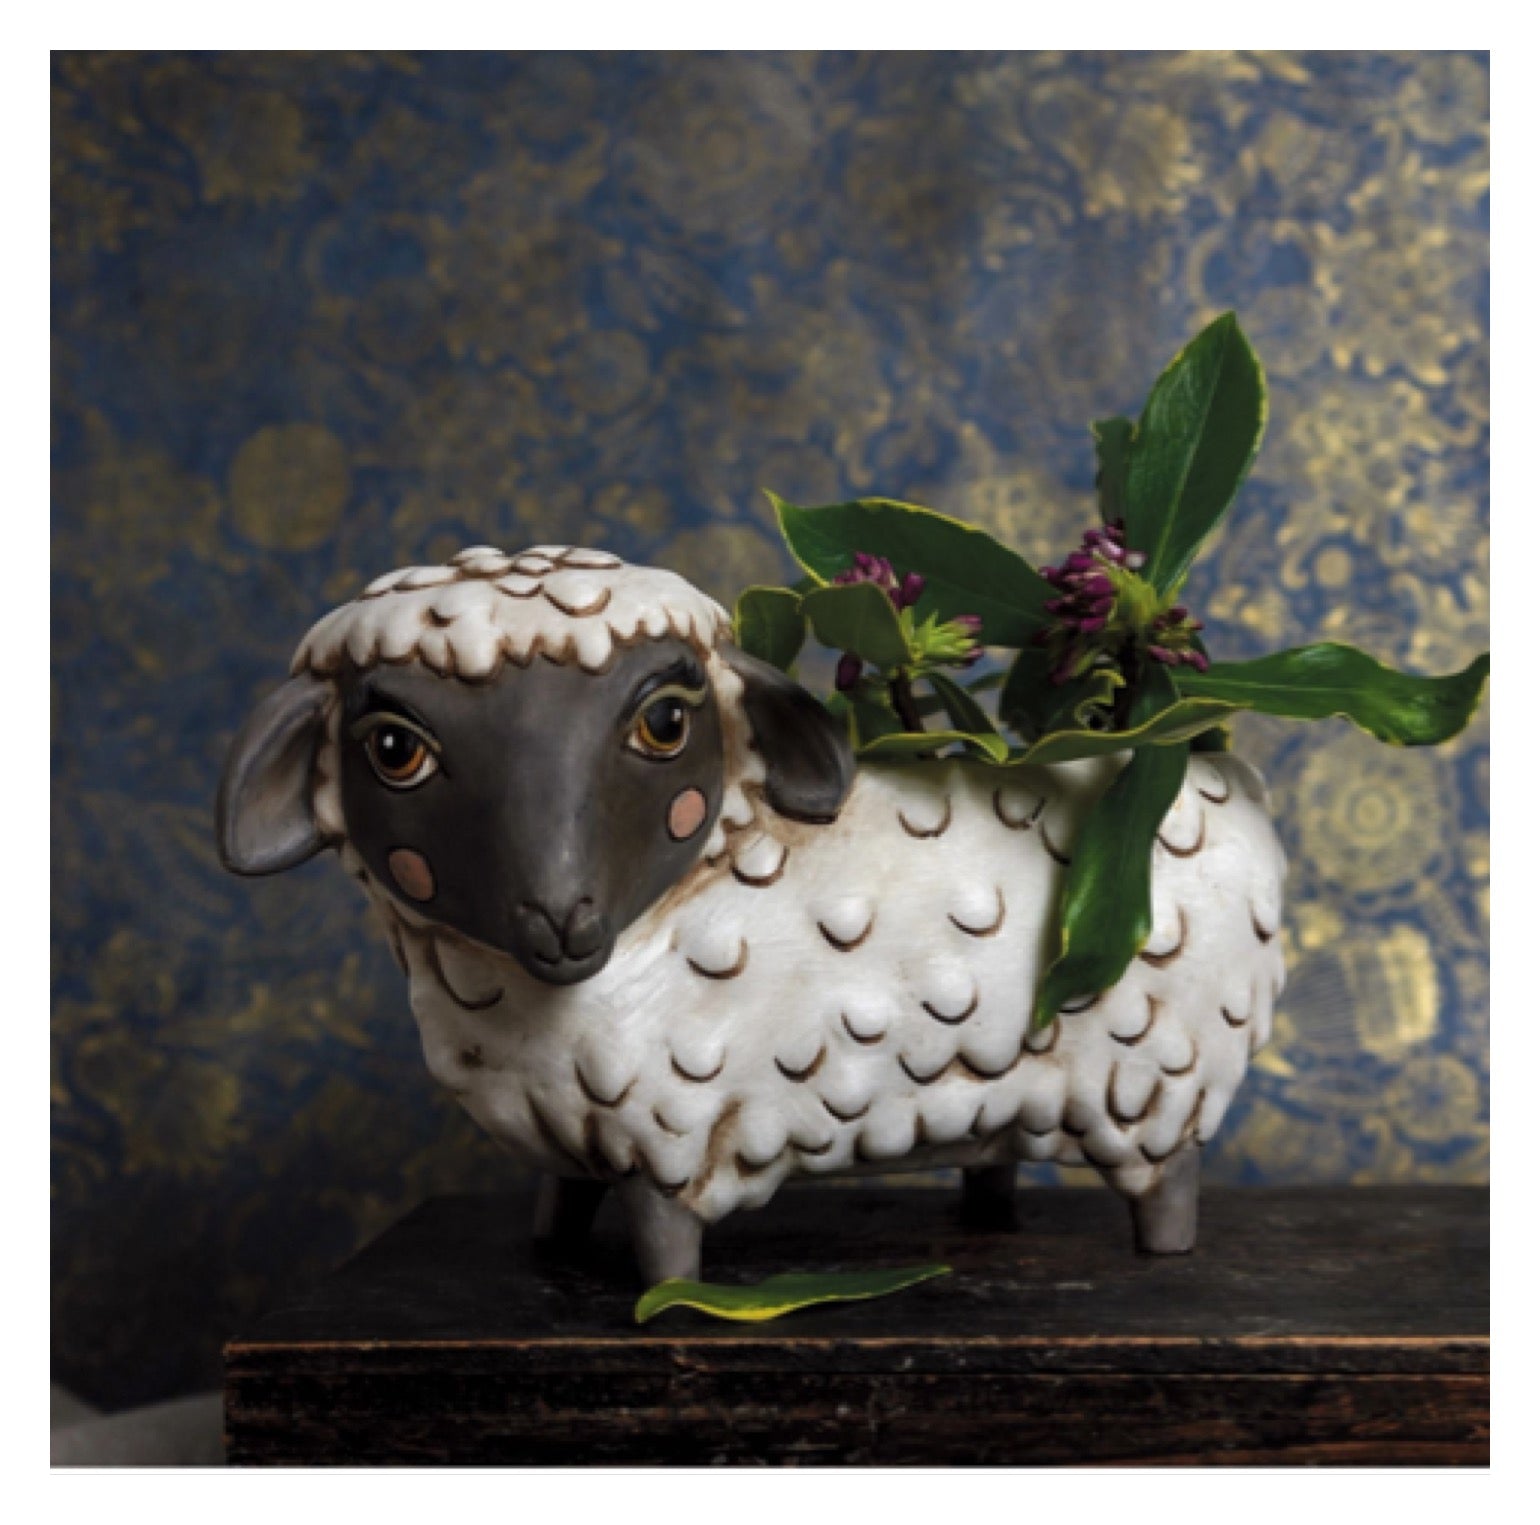 Sheep Grey Pot Plant Planter - The Renmy Store Homewares & Gifts 